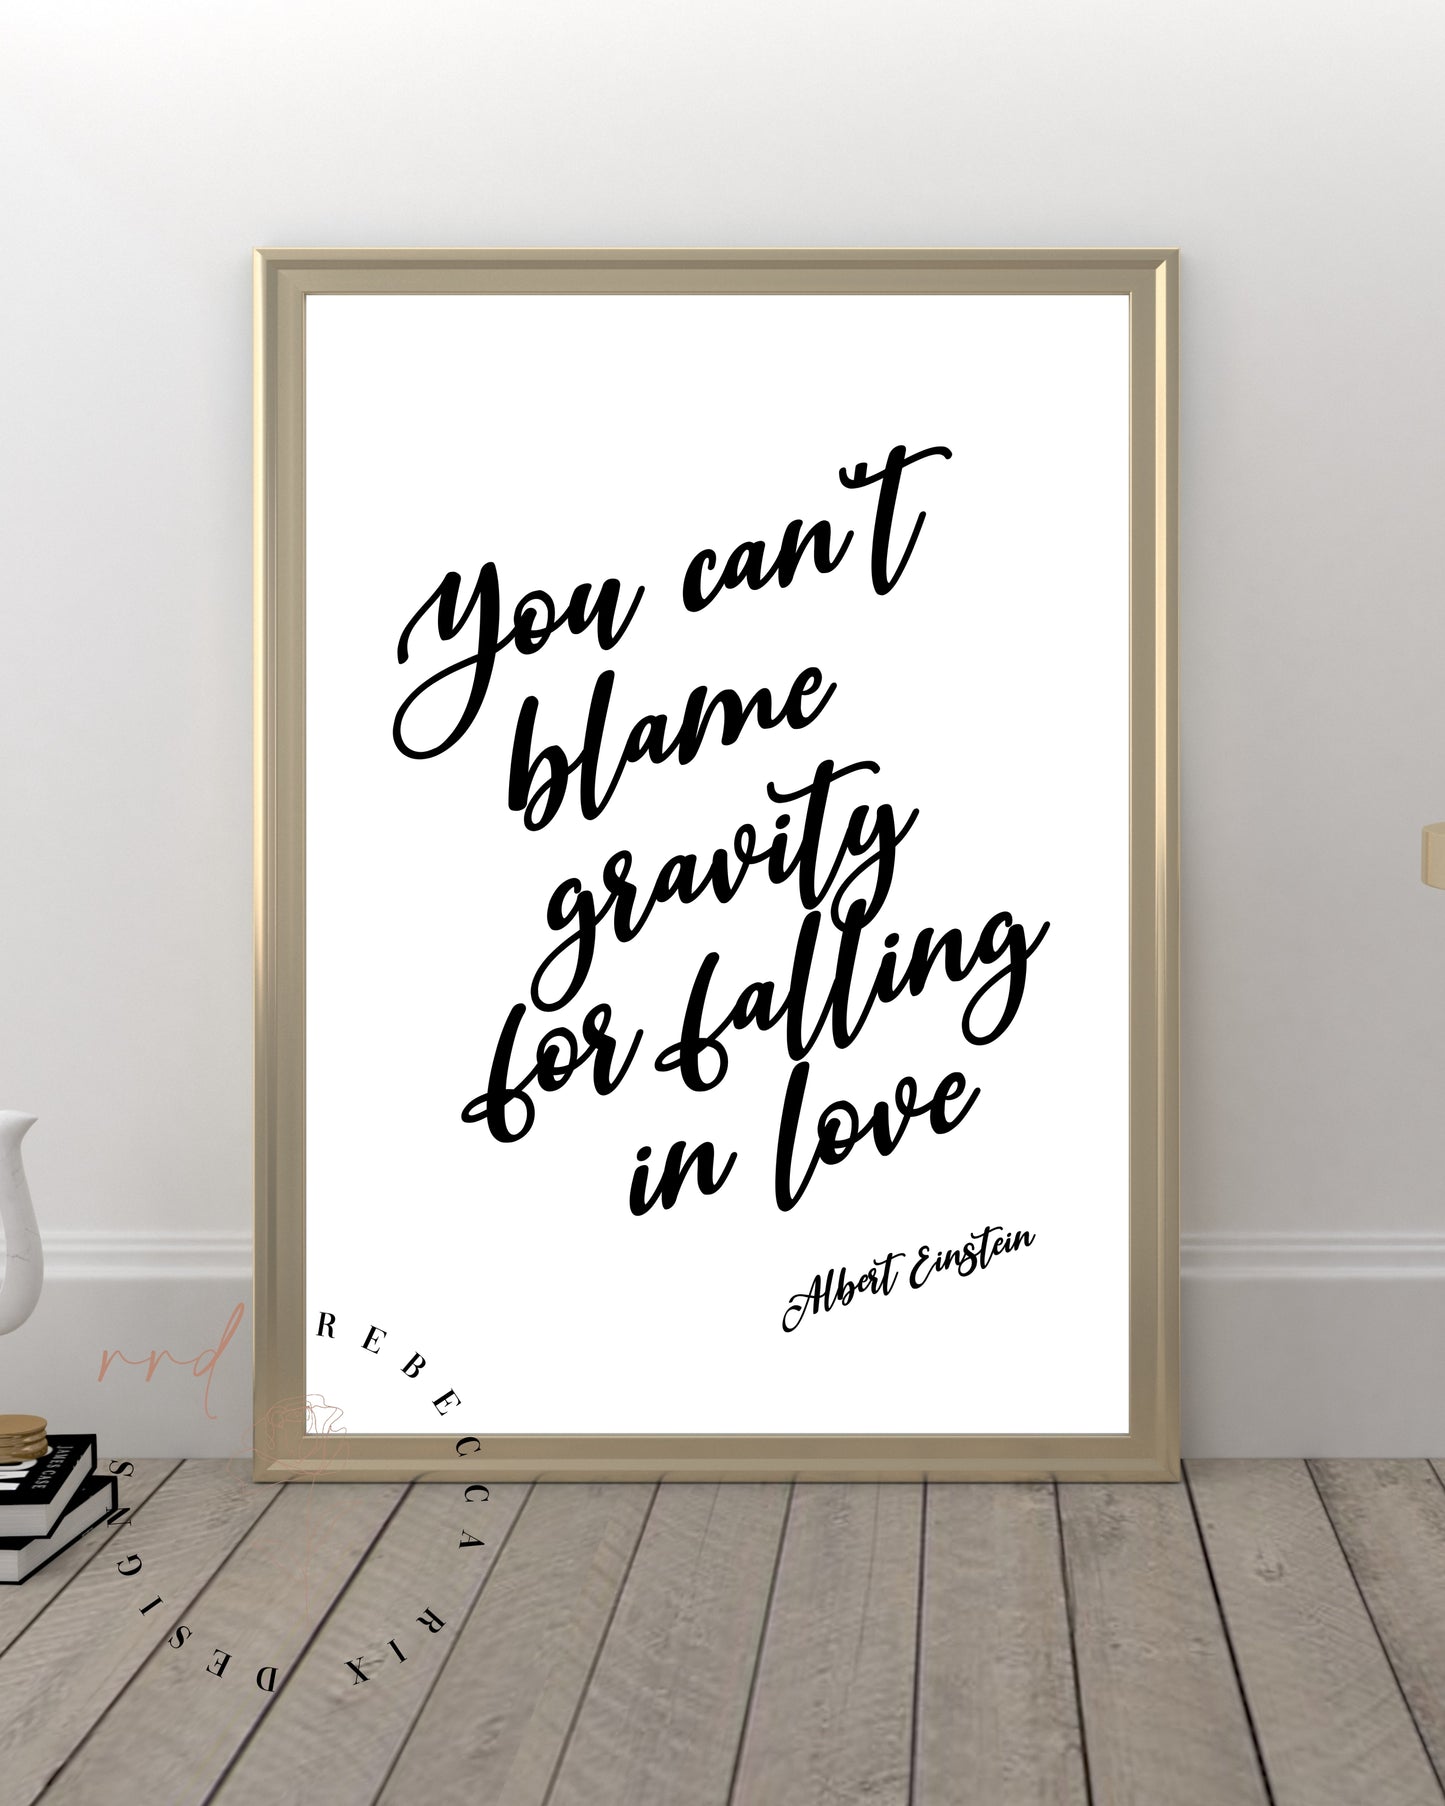 "You Can't Blame Gravity For Falling In Love" Famous Quote By Albert Einstein, Love Quotes, Printable Wall Art